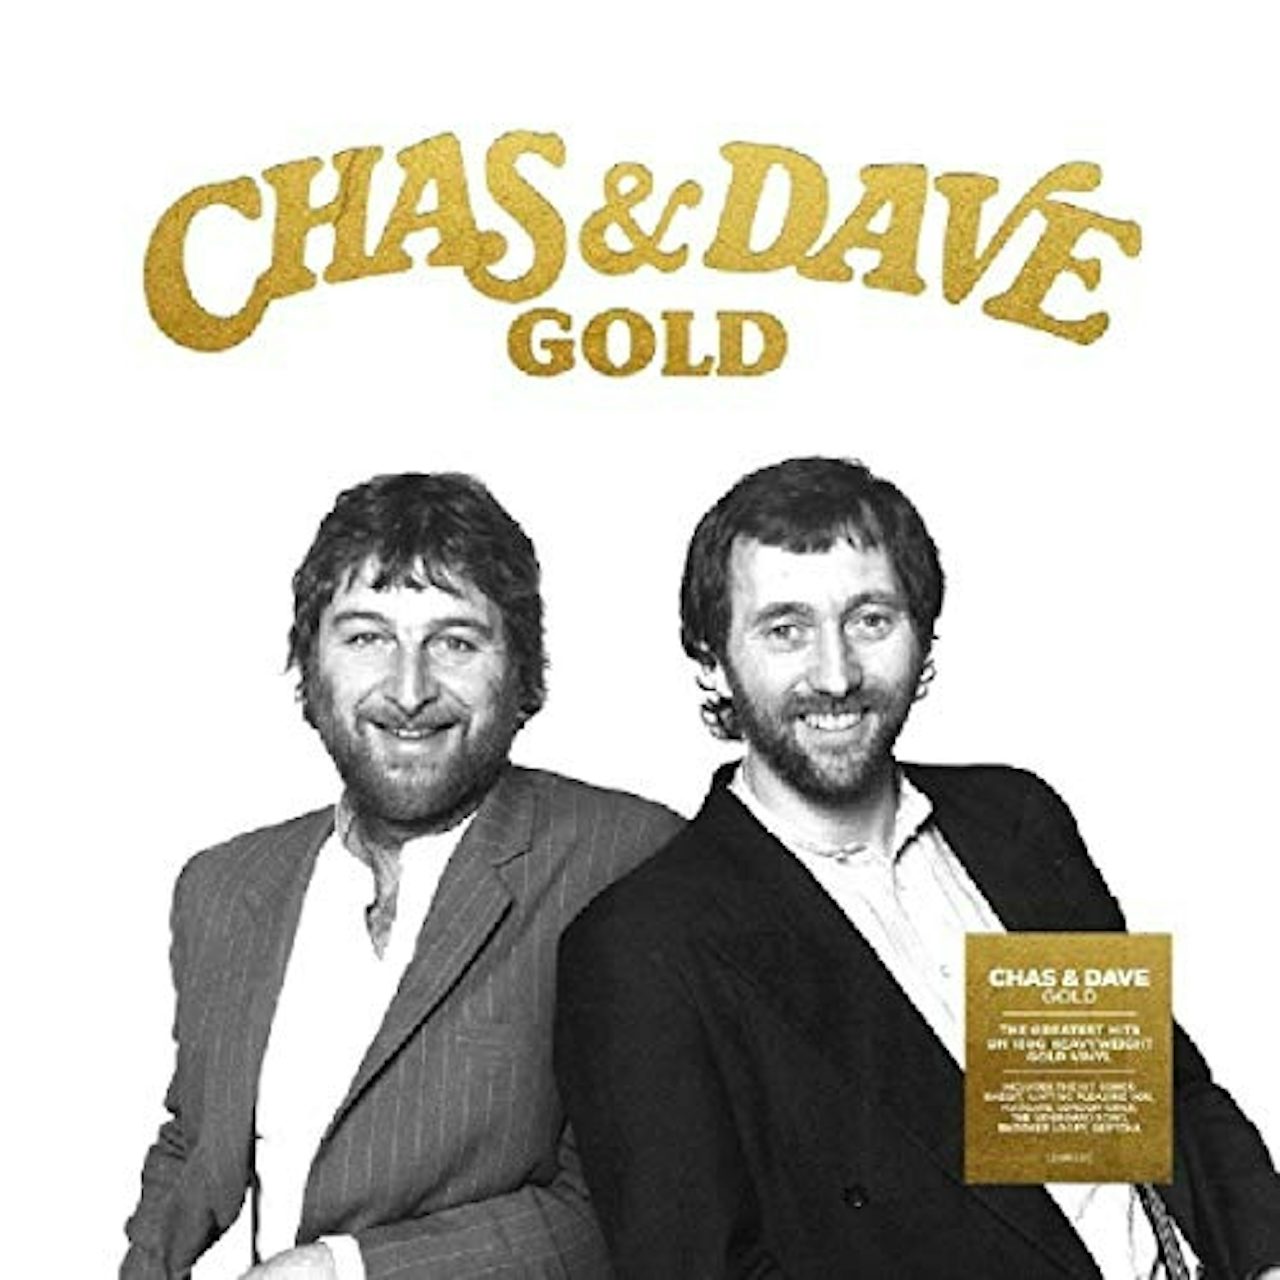 Chas & Dave GOLD Vinyl Record